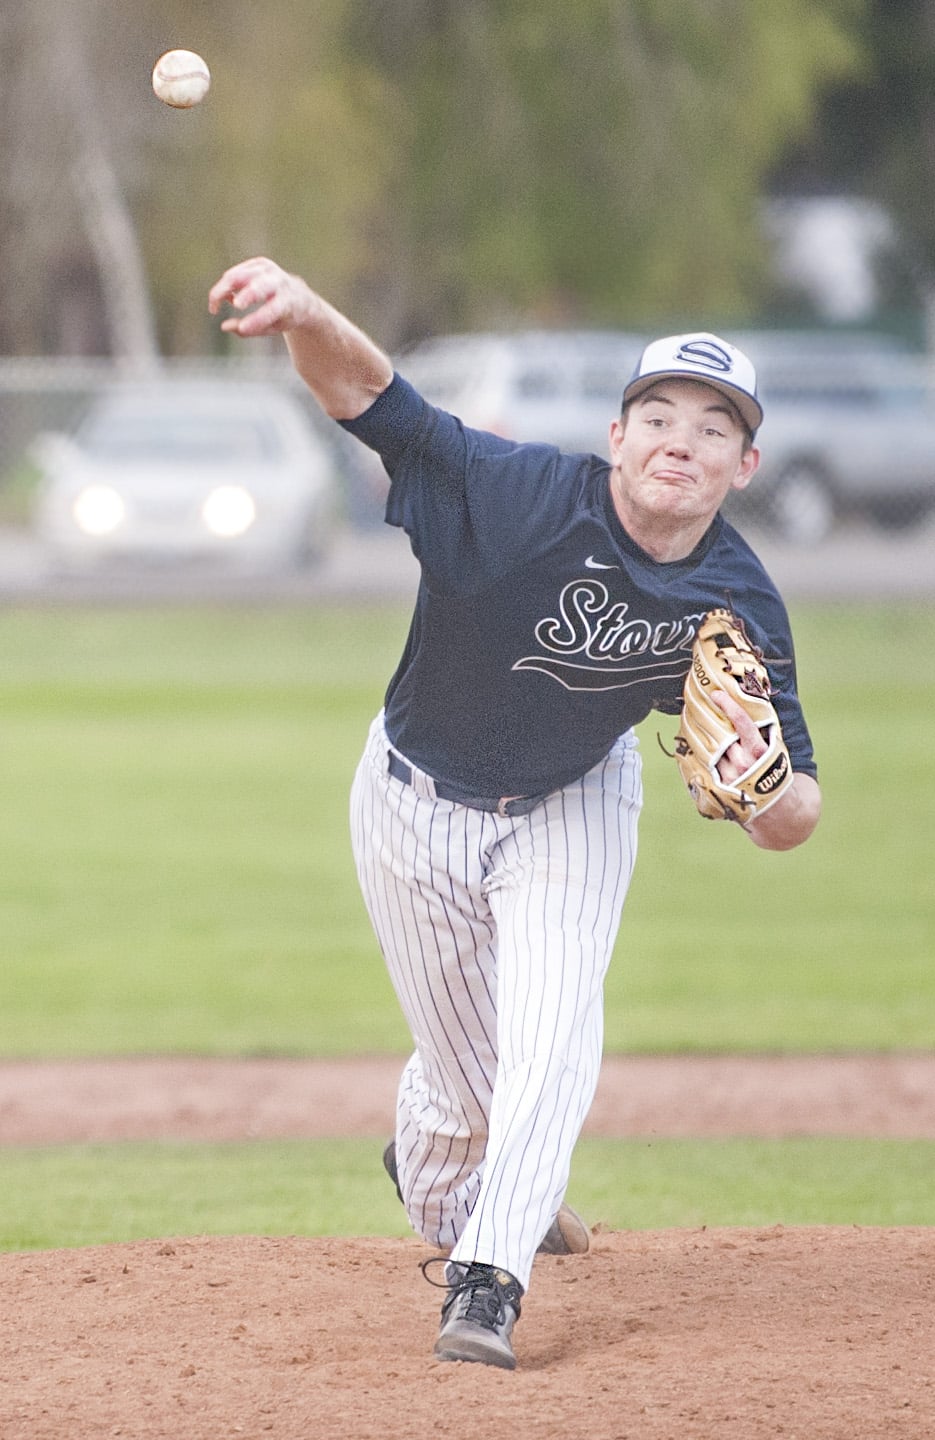 Skyview's Cooper Barnum struck out two batters in one inning of a 4A Greater St. Helens League baseball game Thursday in Battle Ground.